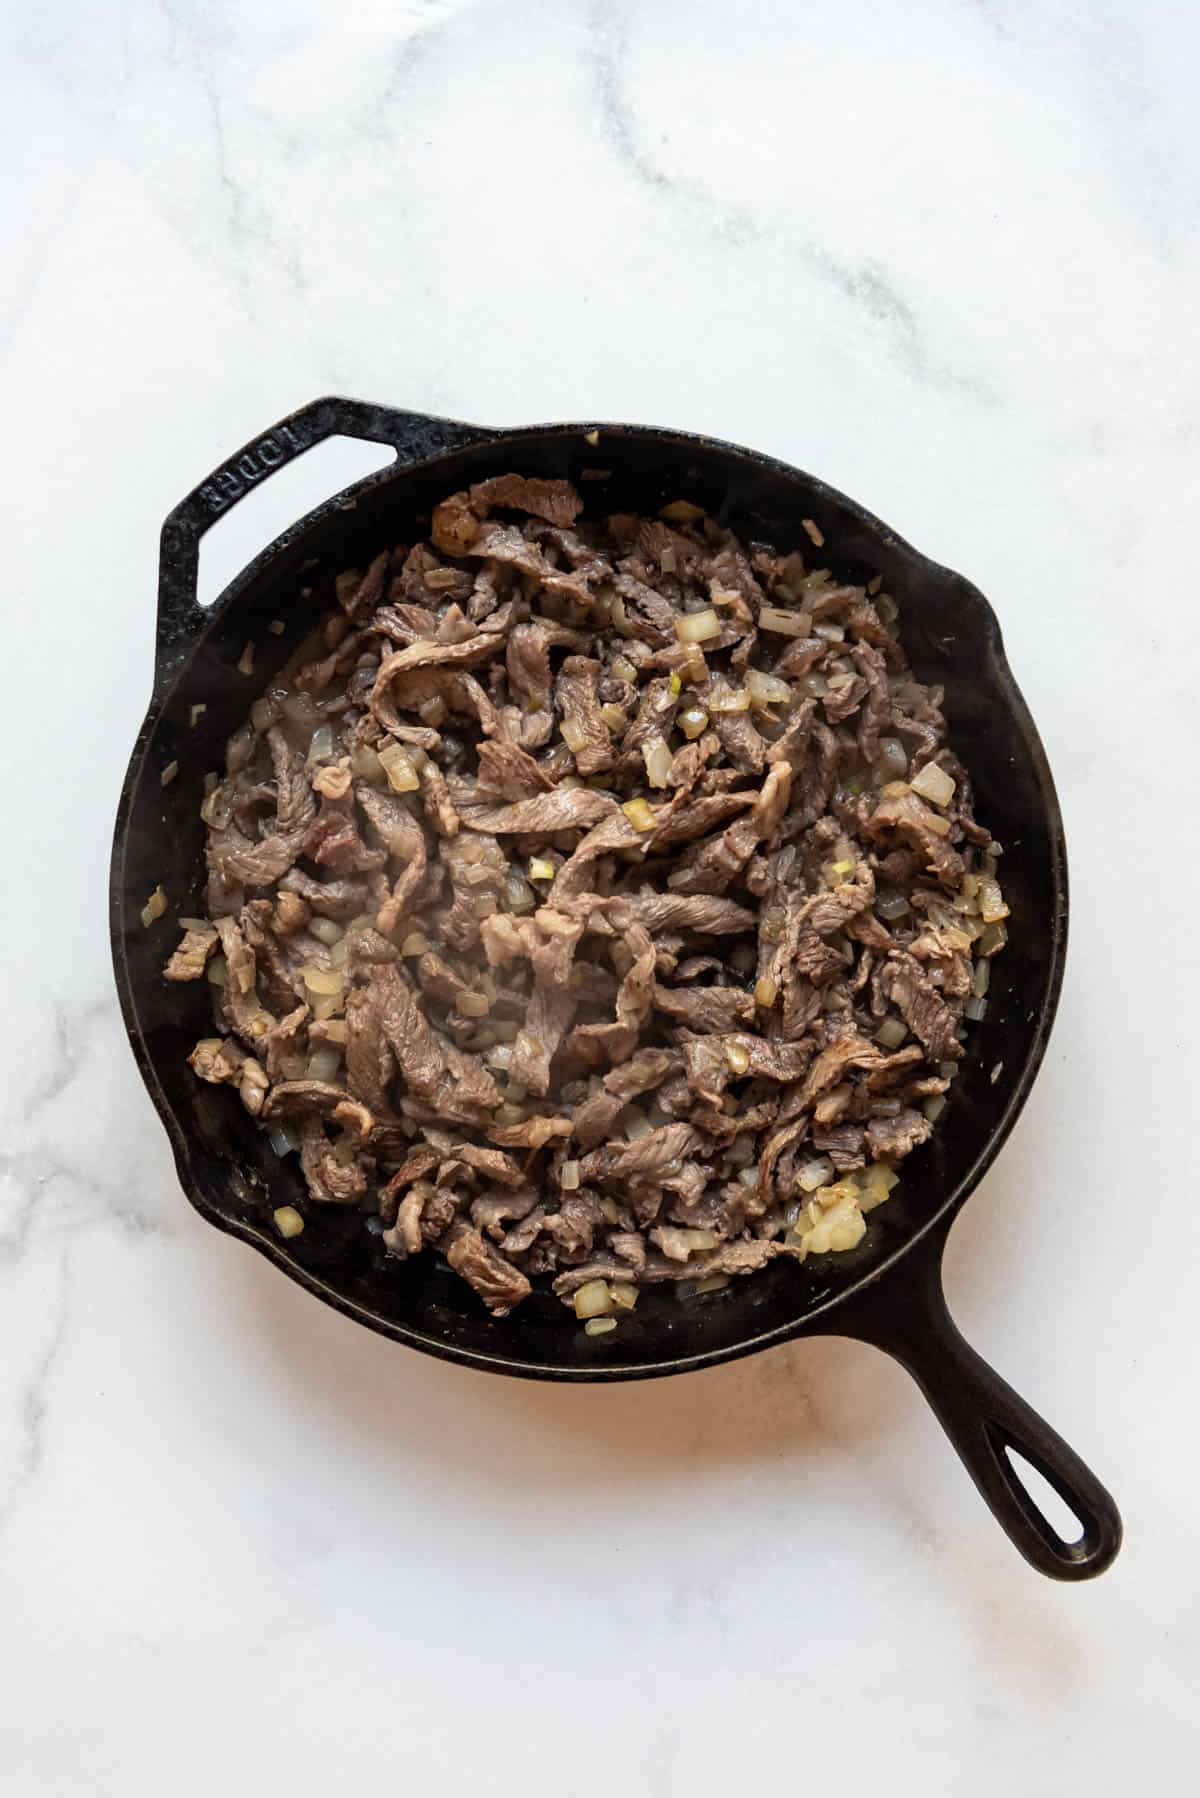 Cook philly cheese steak meat and onions in a pan.